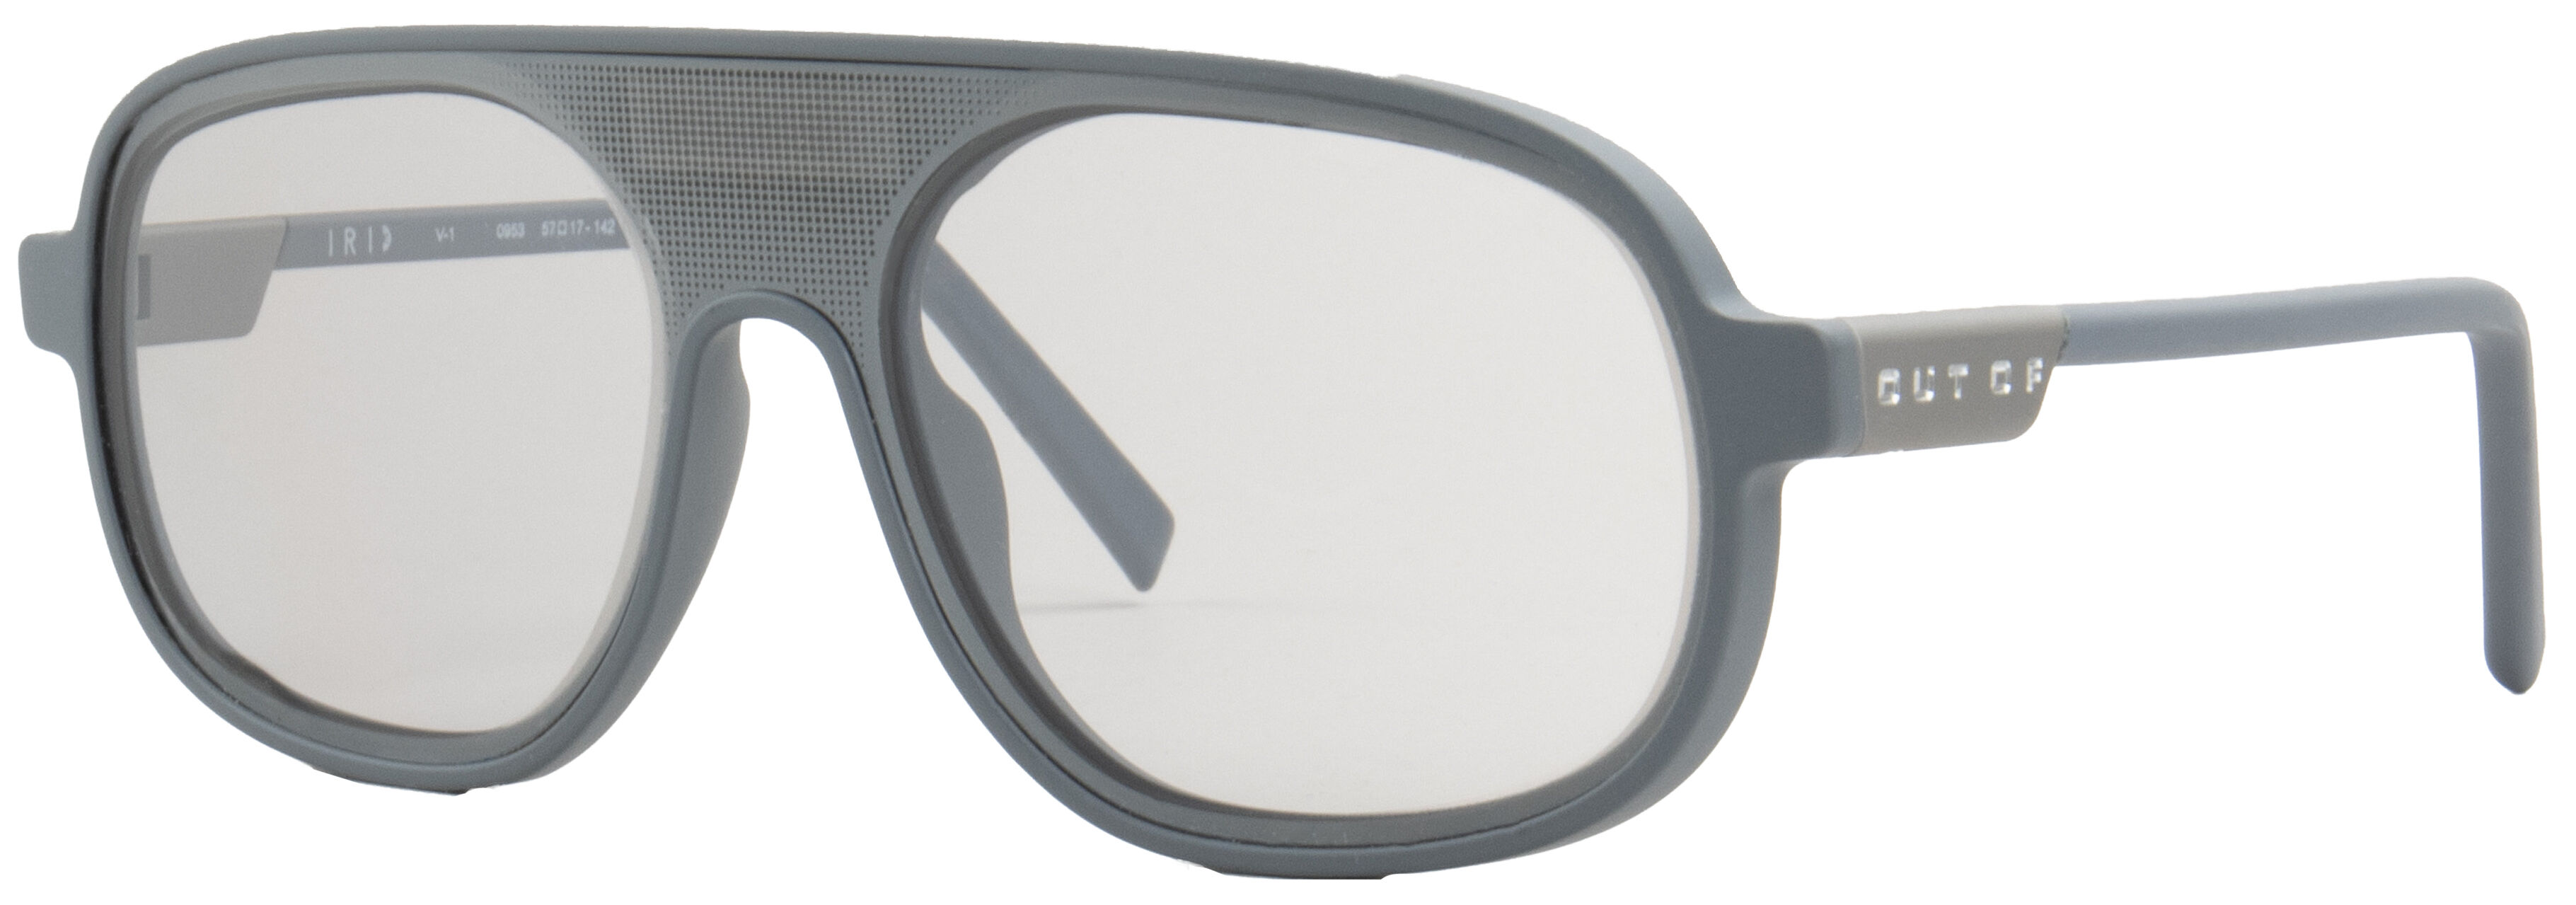 OUT OF VISION 1 MATTE GREY SILVER IRID X10 One Size